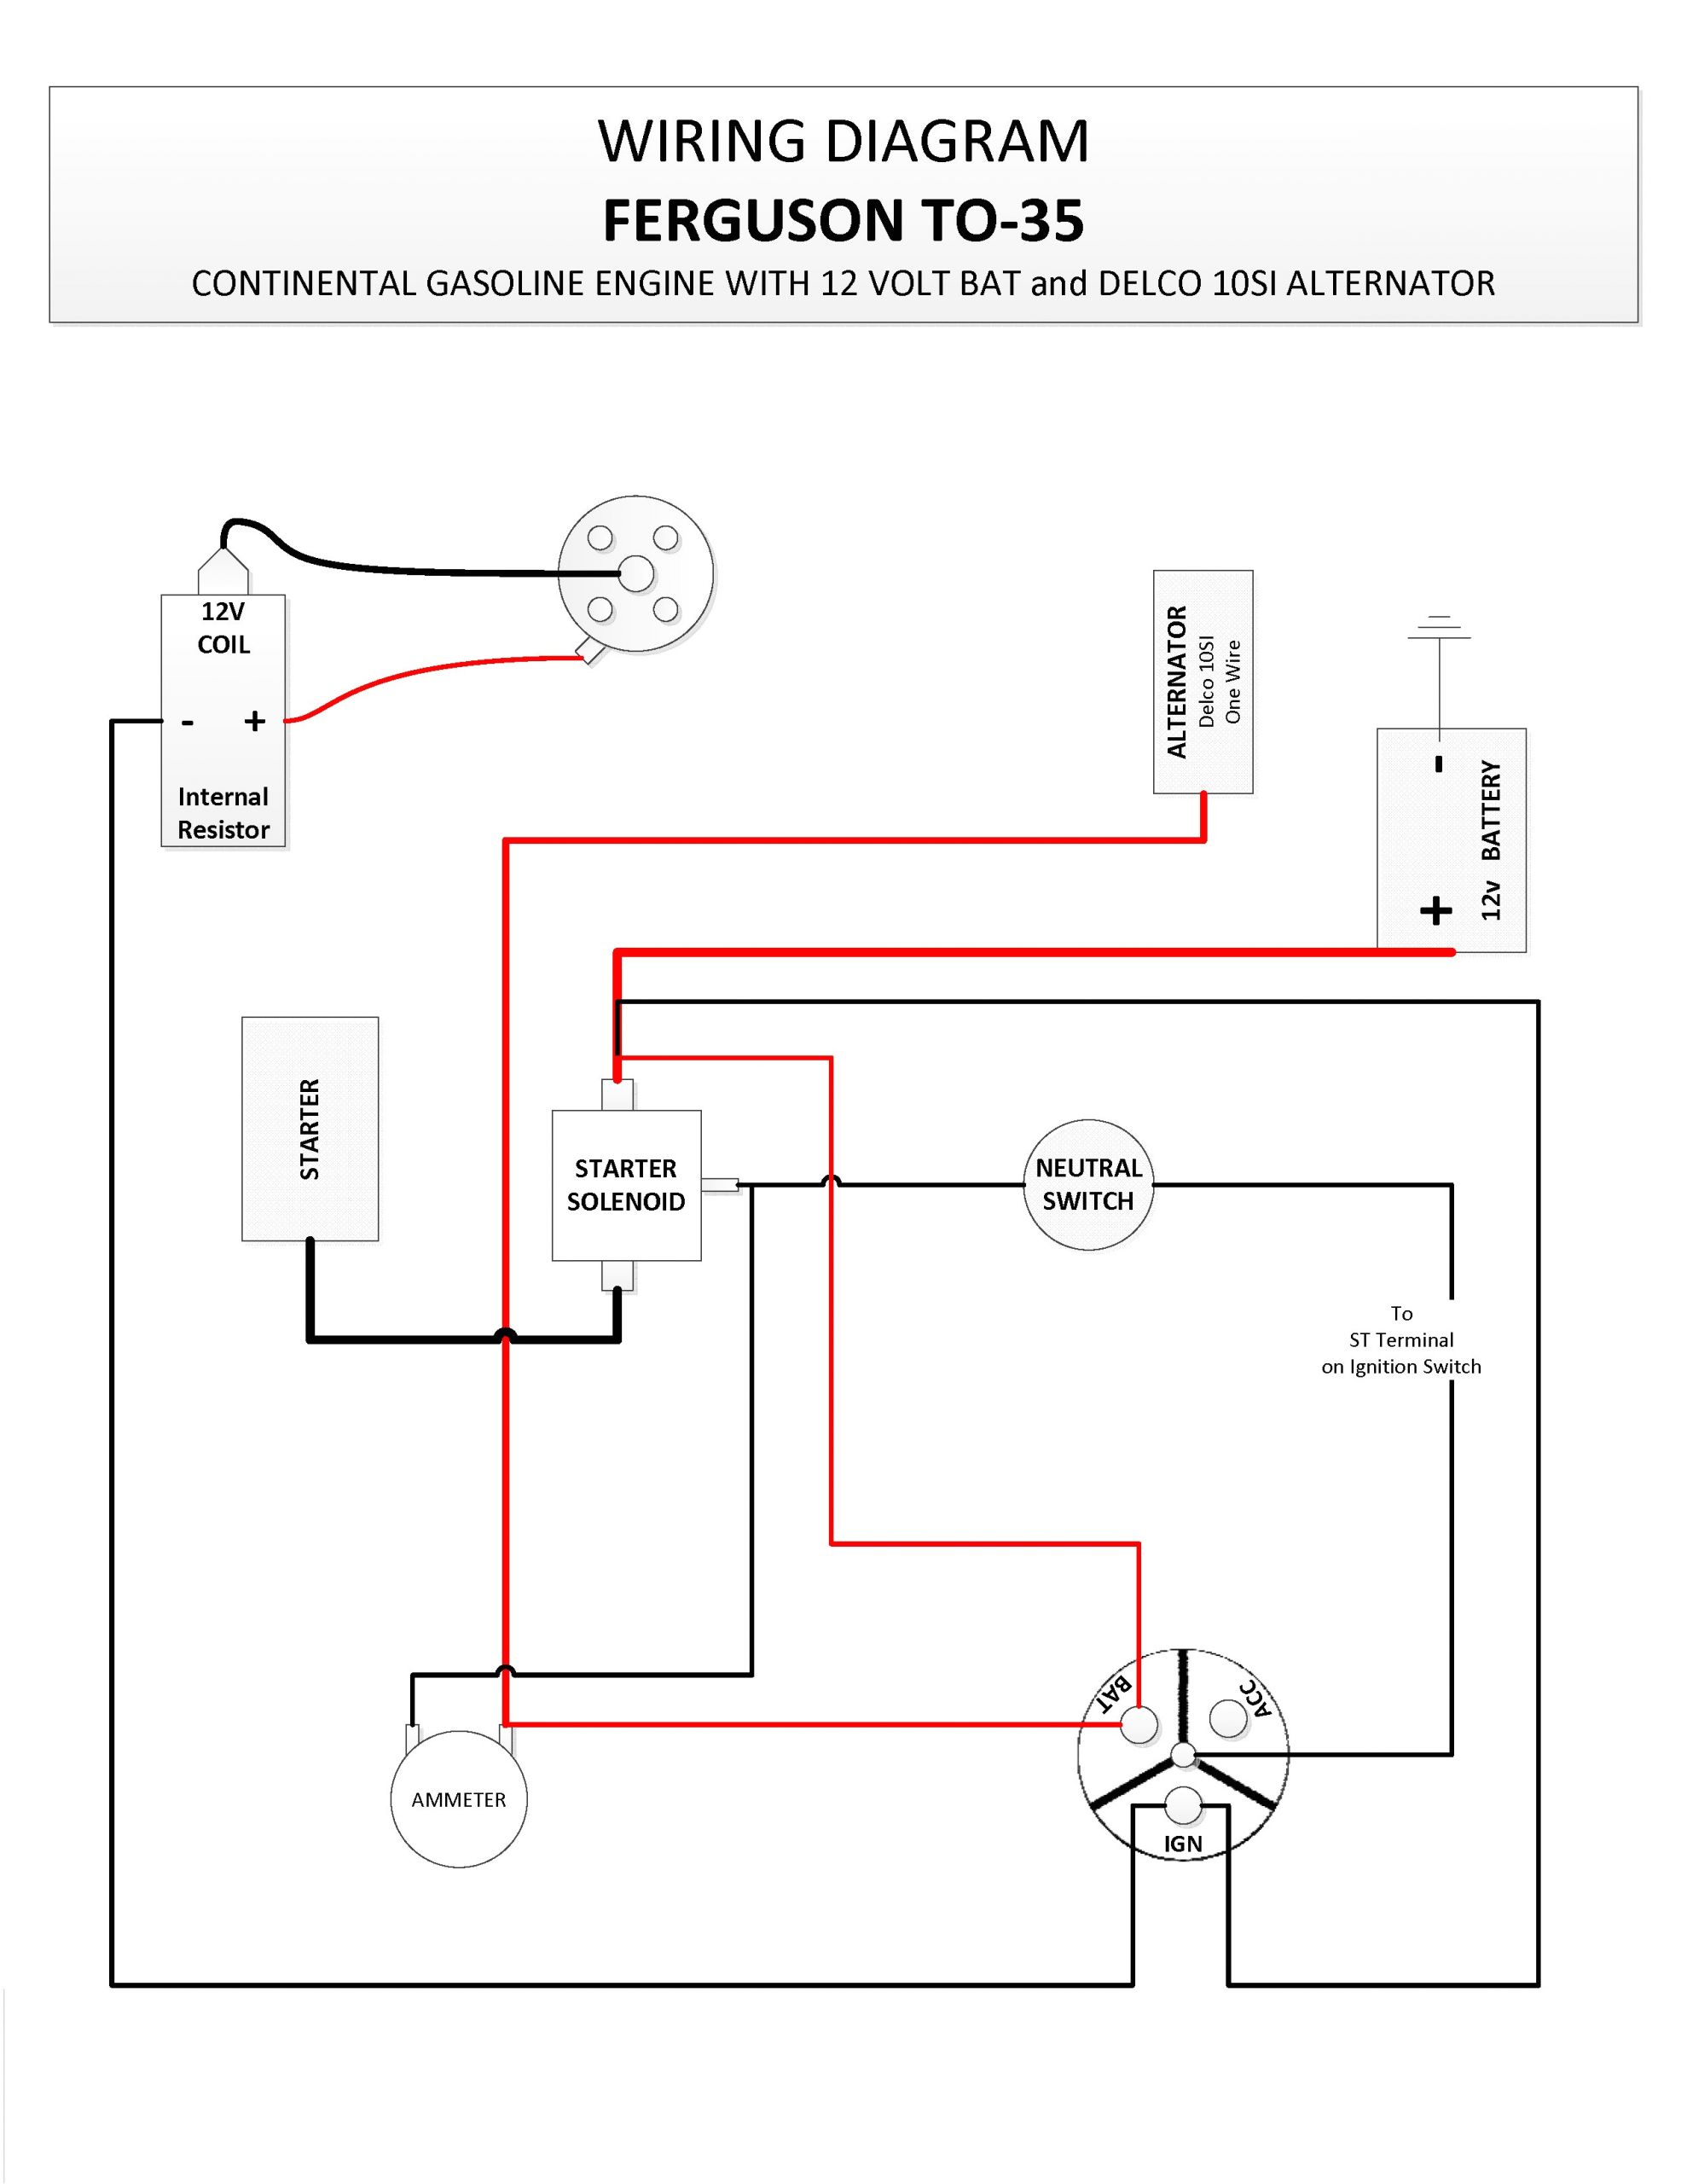 ford 9n 12 volt conversion wiring diagram ford naa wiring diagram lovely generous 1950 ford 8n wiring diagram gallery electrical and wiring 2f jpg